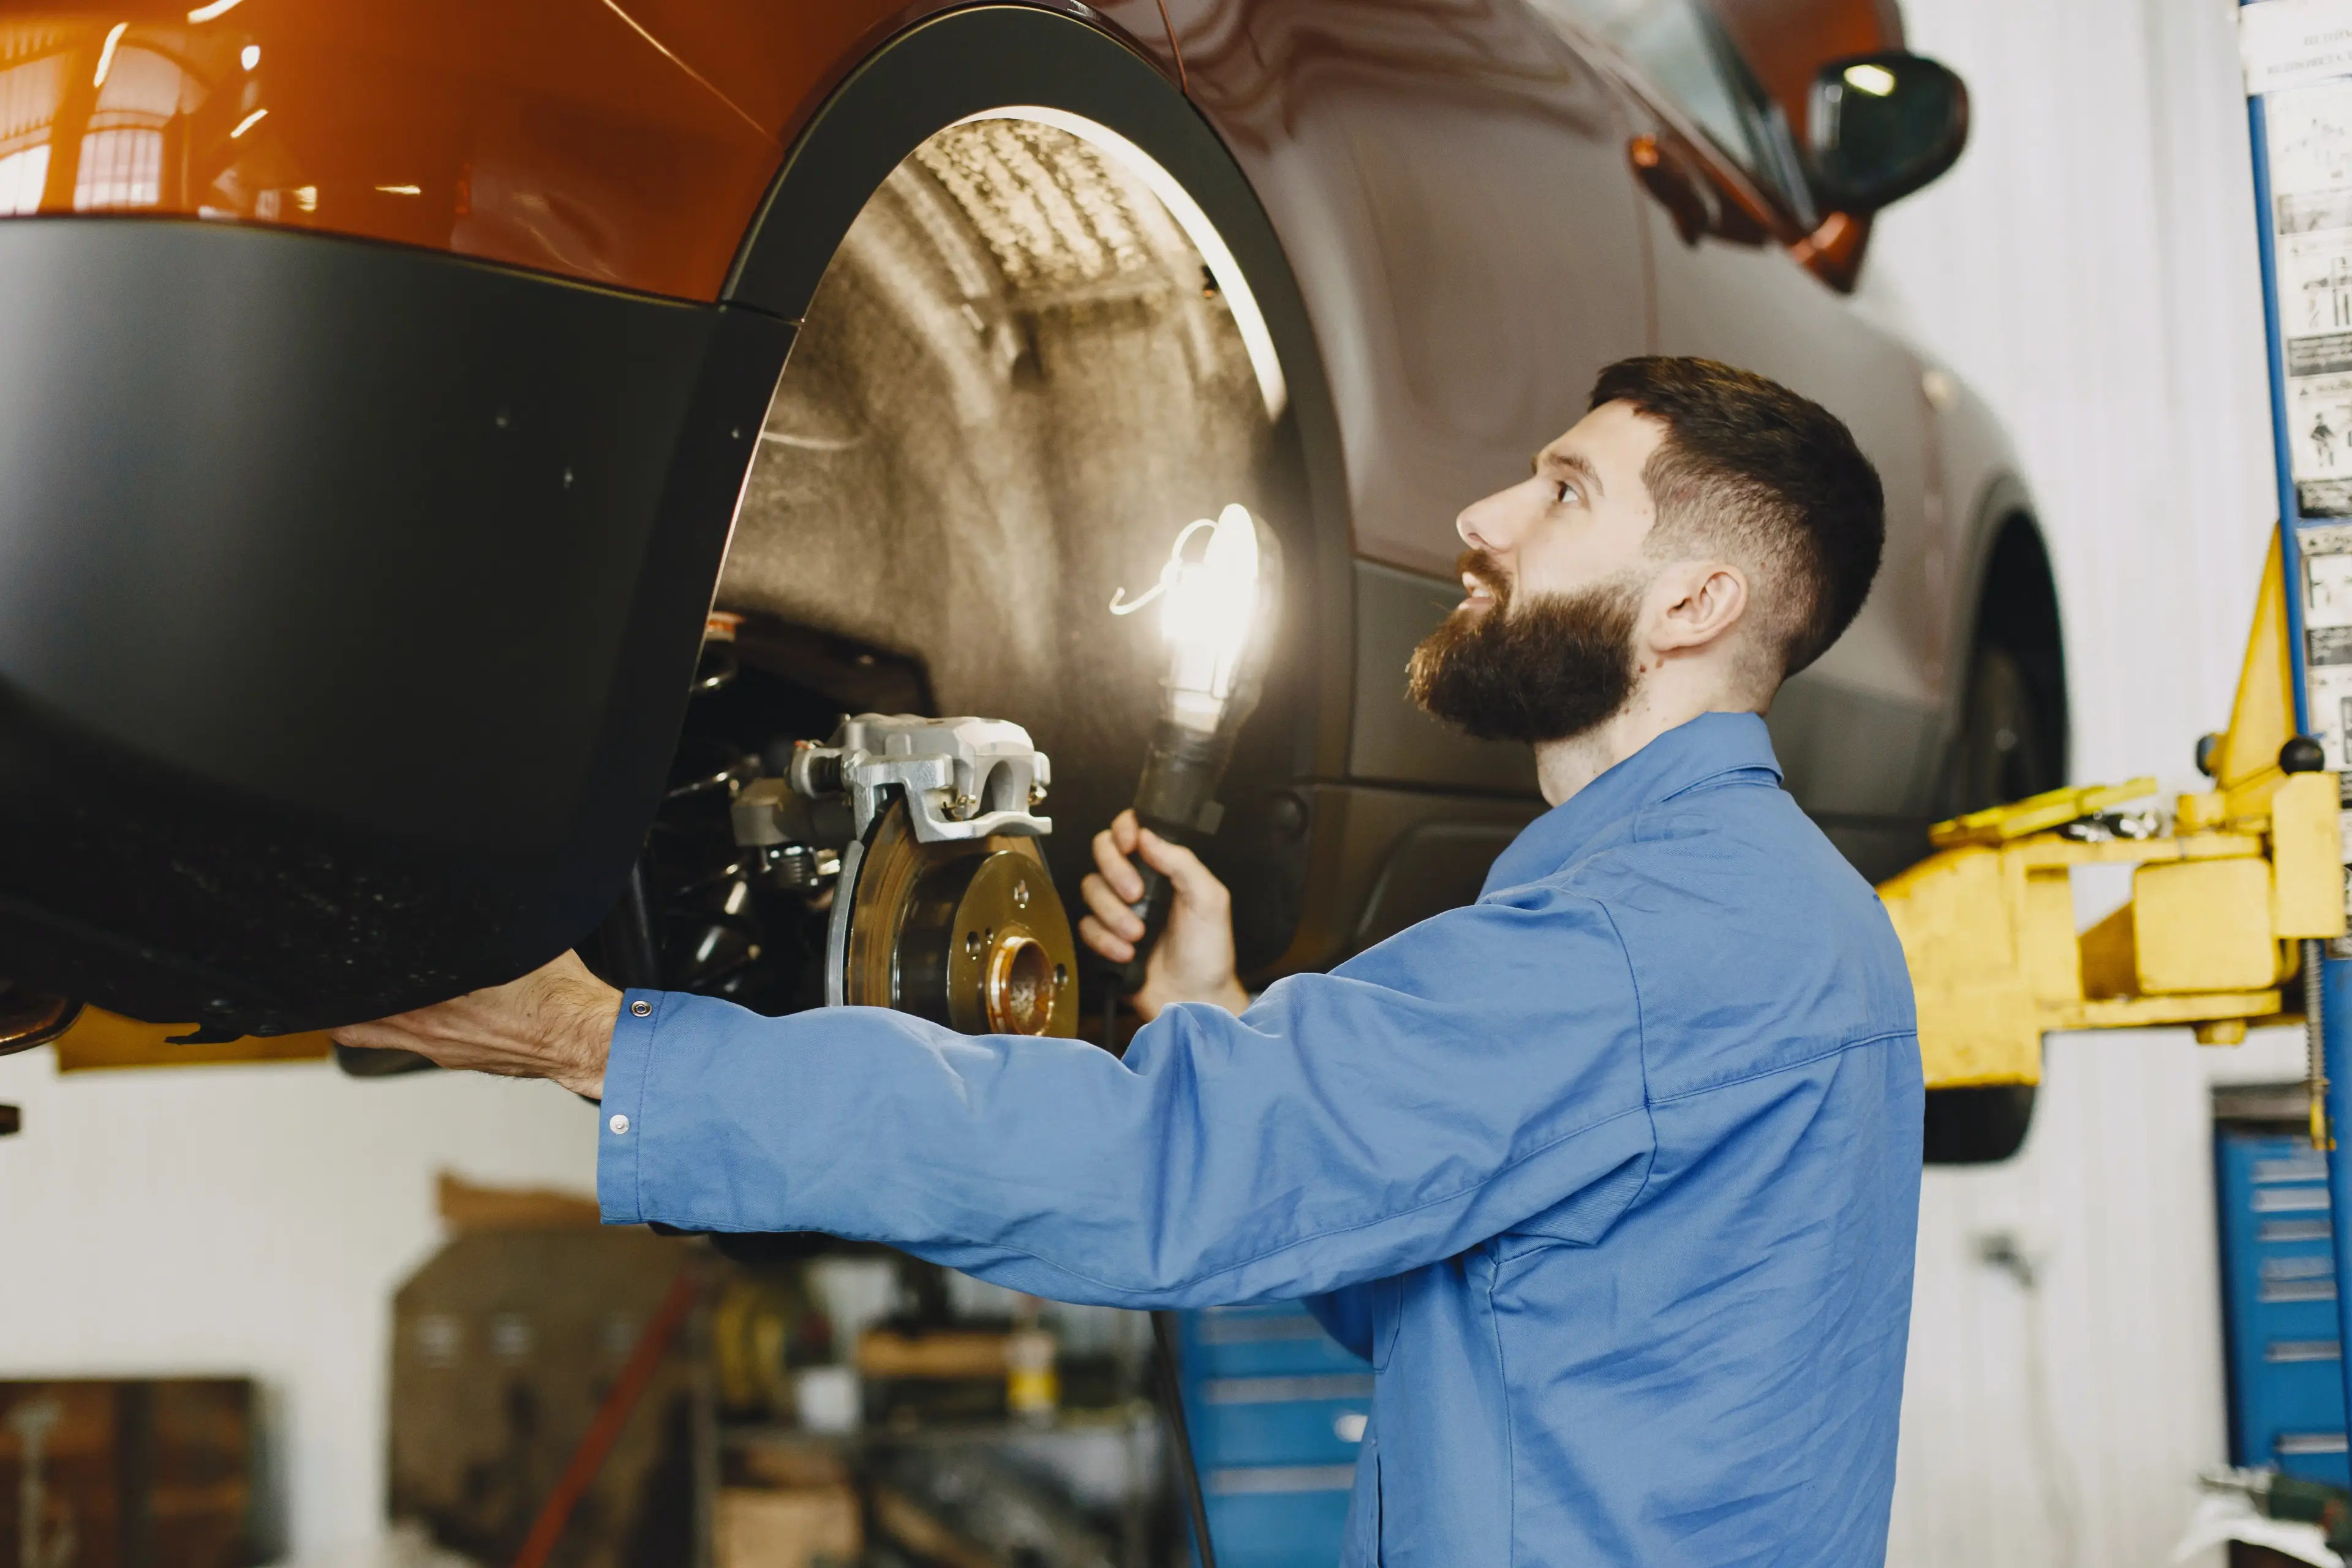 A Mechanic performing vehicle repairs that are covered under the car warranty coverage service contract